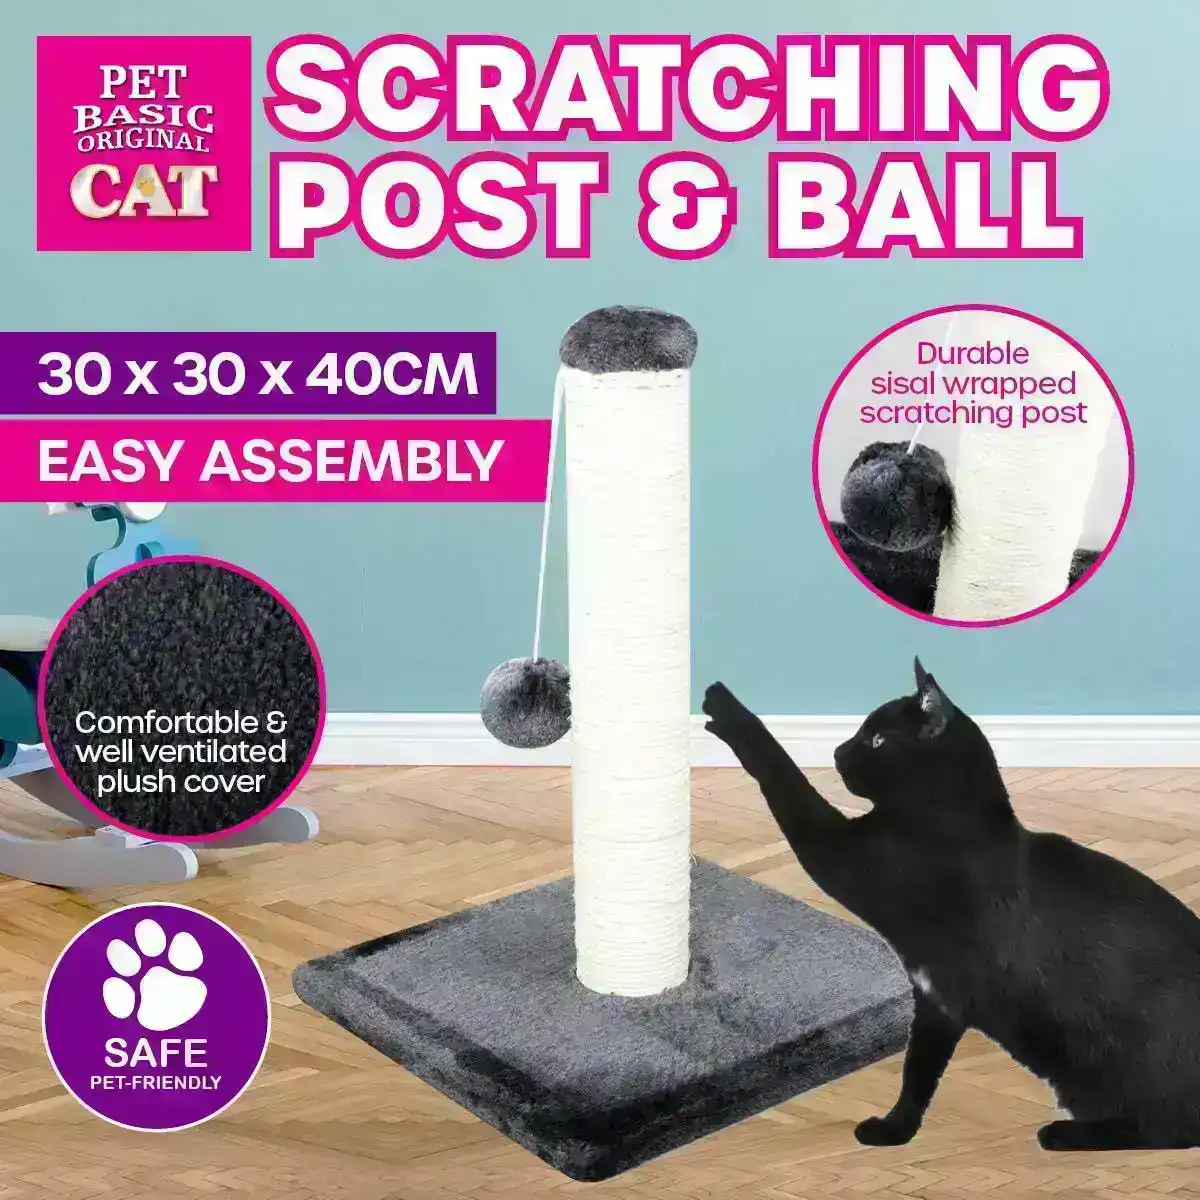 Pet Basic® Cat Scratching Post & Ball Fun Play Scratch Easy Assembly 30 x 40cm